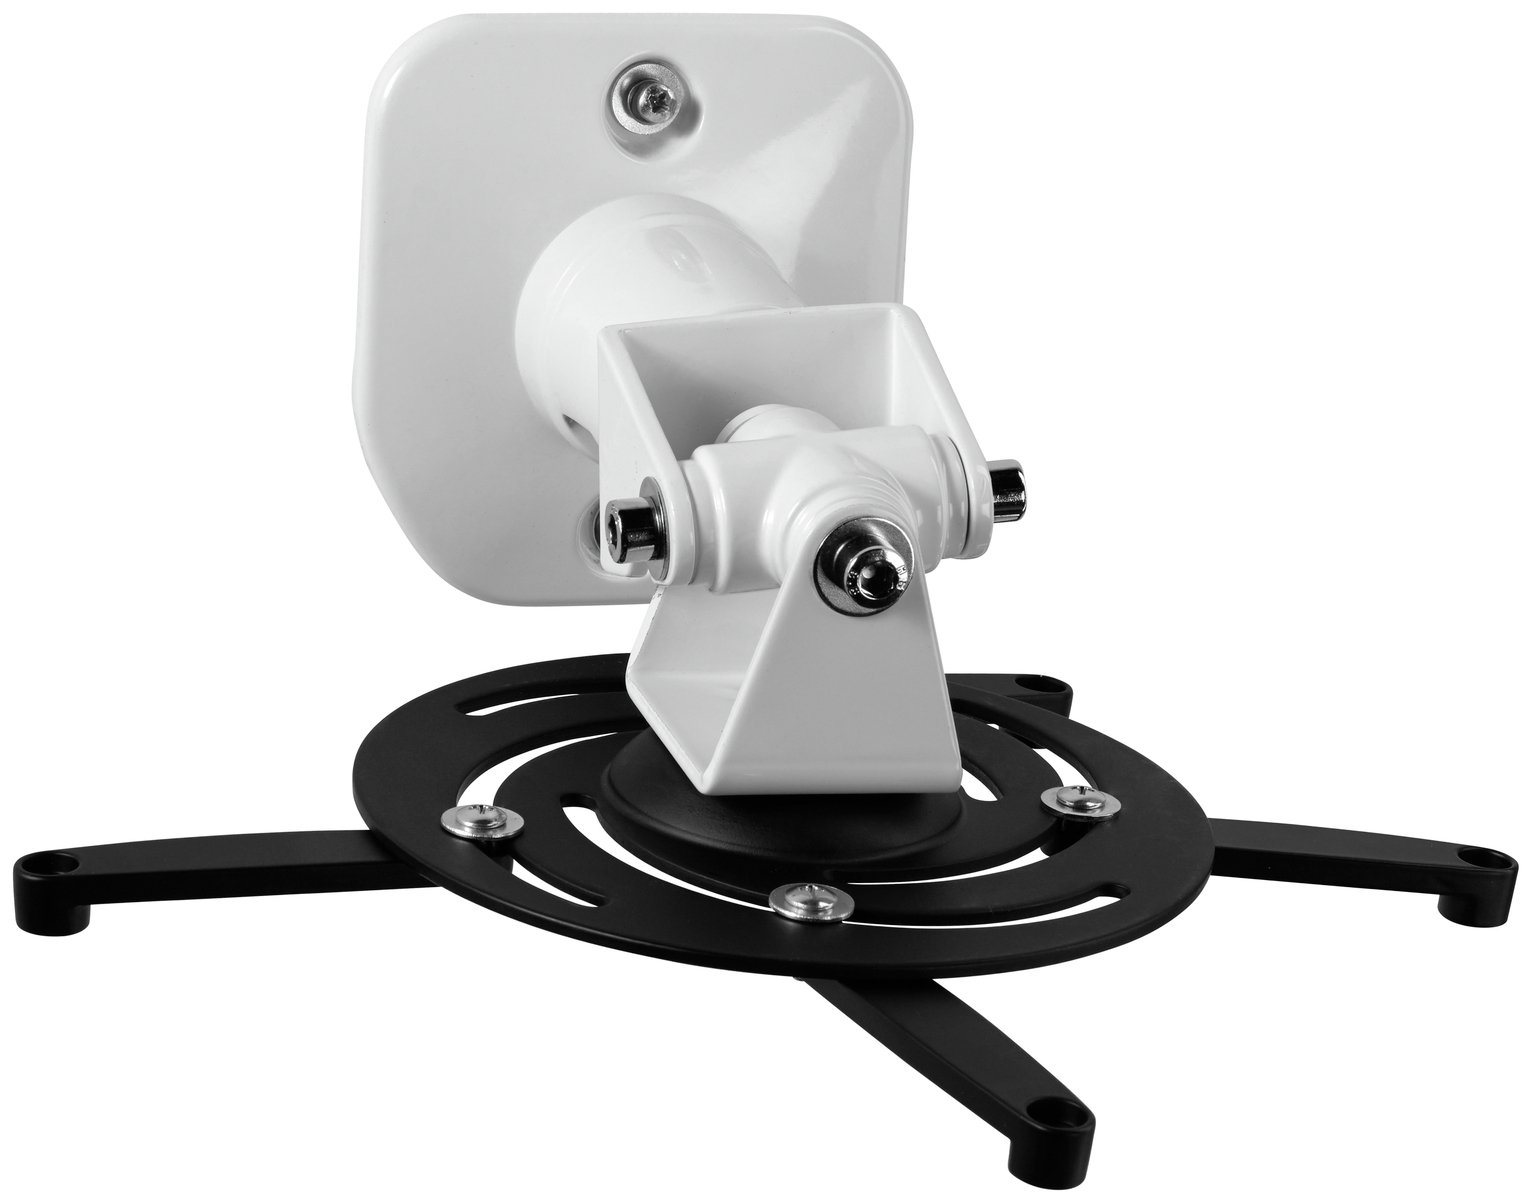 One For All WM5320 Universal Projector Mount Review